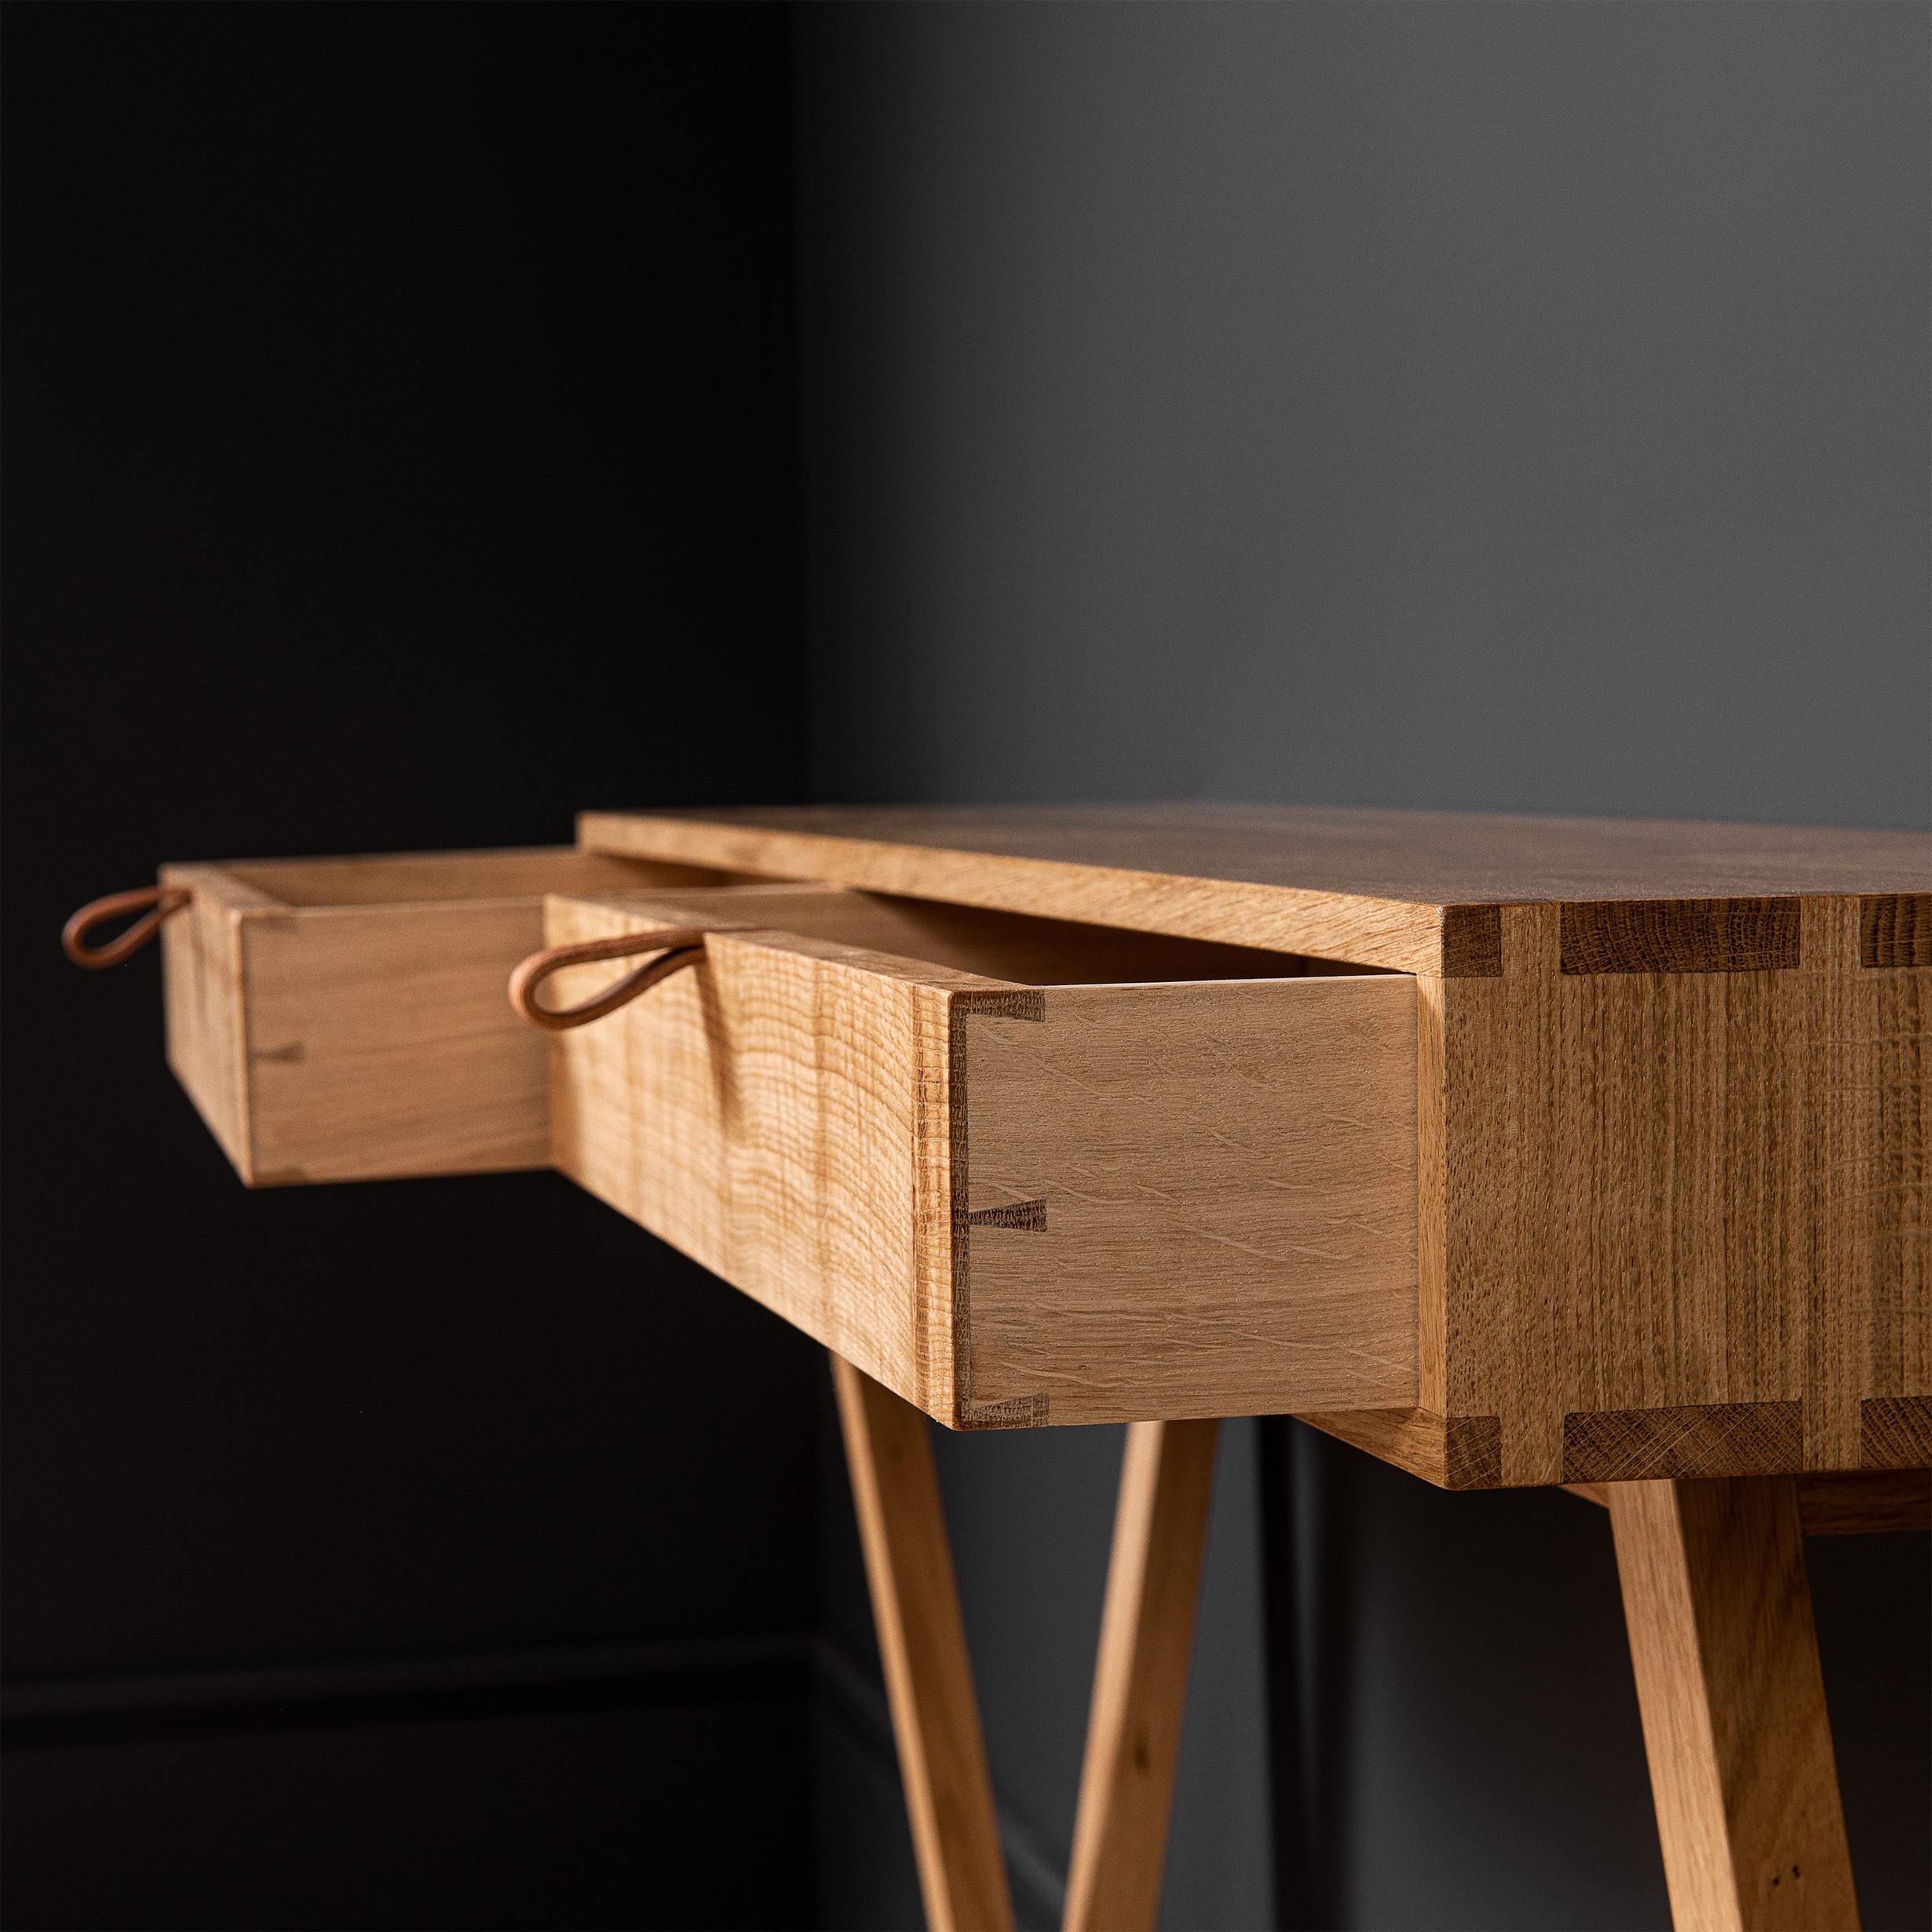 Modernist oak entry console table with drawers designed and produced in England using traditional furniture making techniques. Completely handcrafted from the finest fully quarter-sawn English oak. Hand dovetailed joints to the main oak box and all